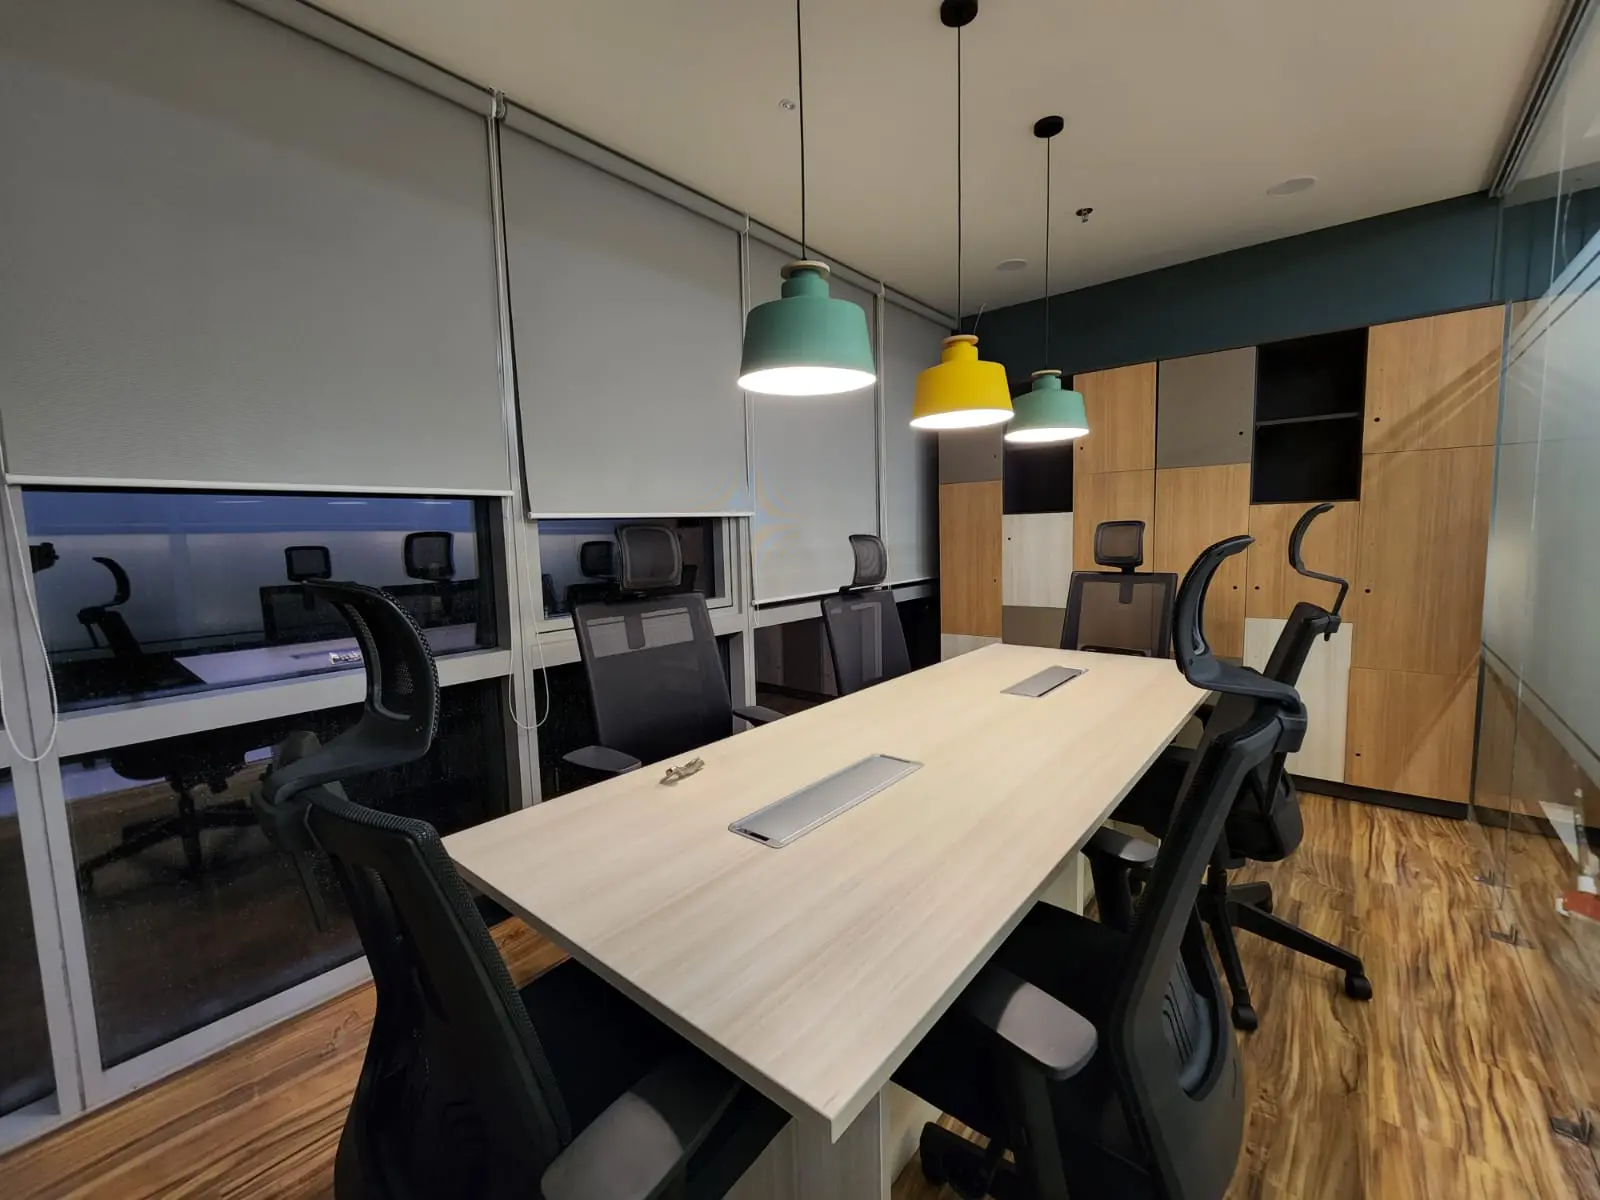 Office Conference Area | Concepts Architects & Interior Designers